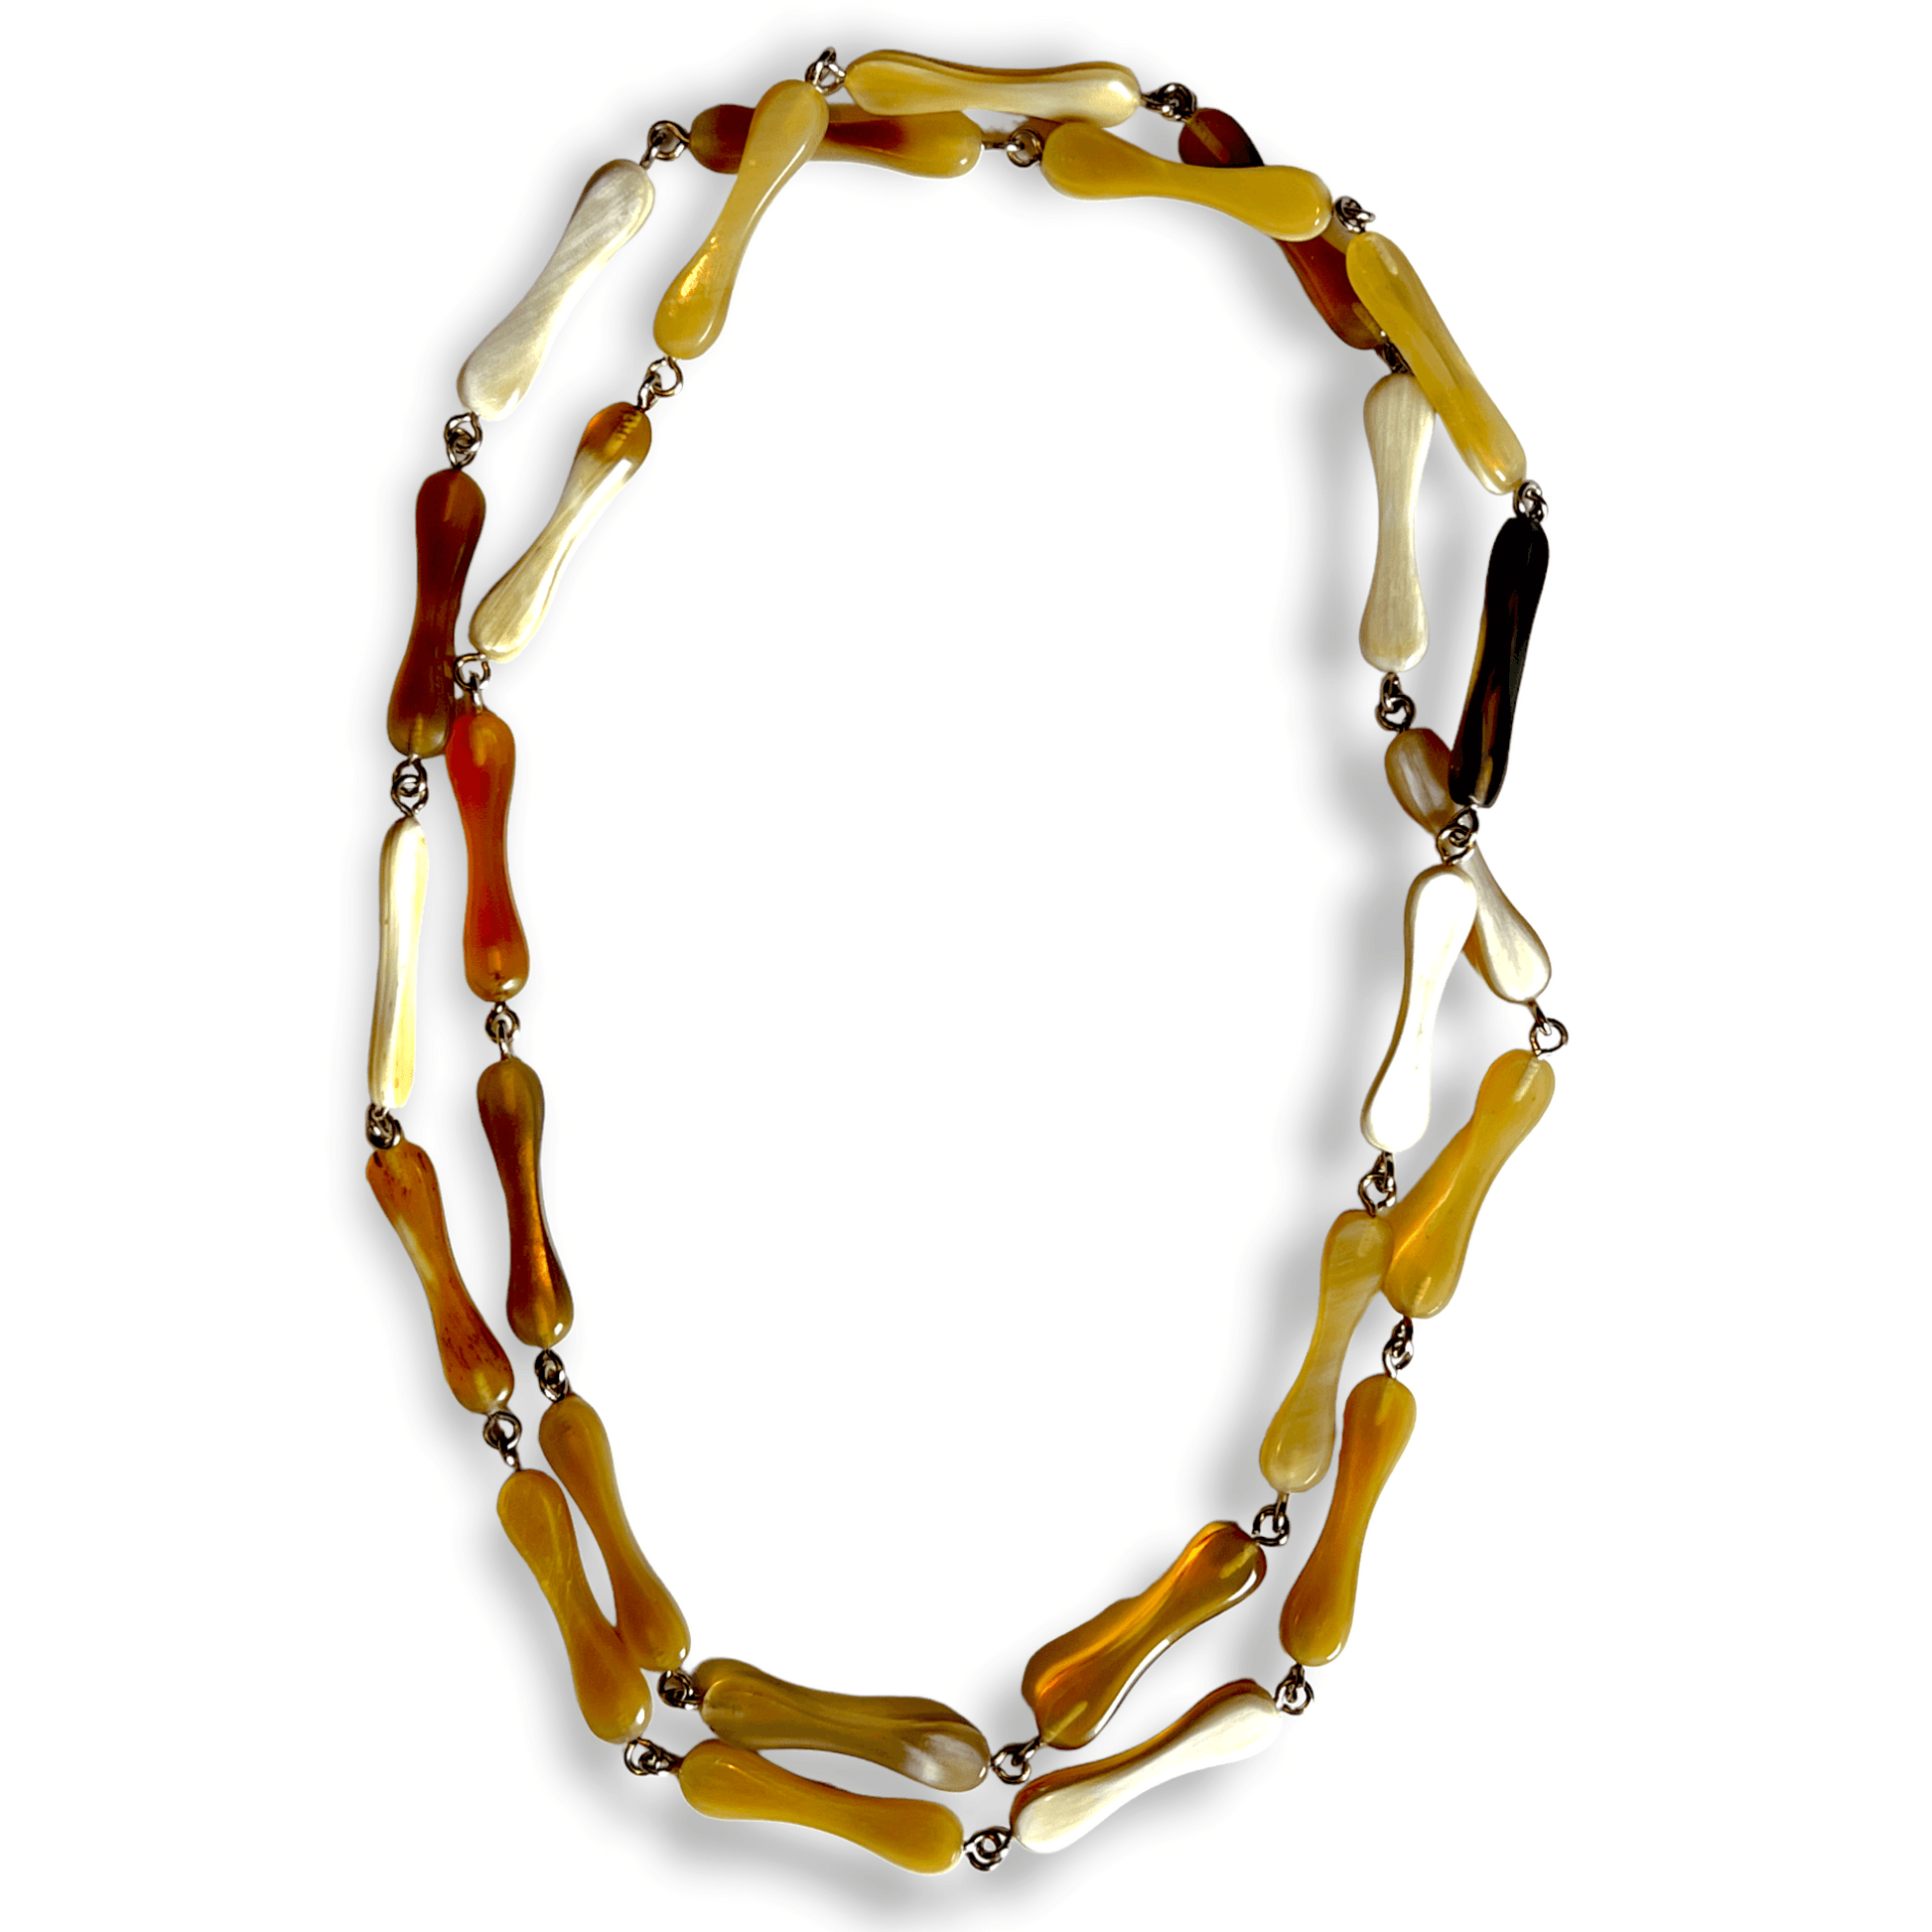 Earth tone linked continuous link necklace - Sundara Joon